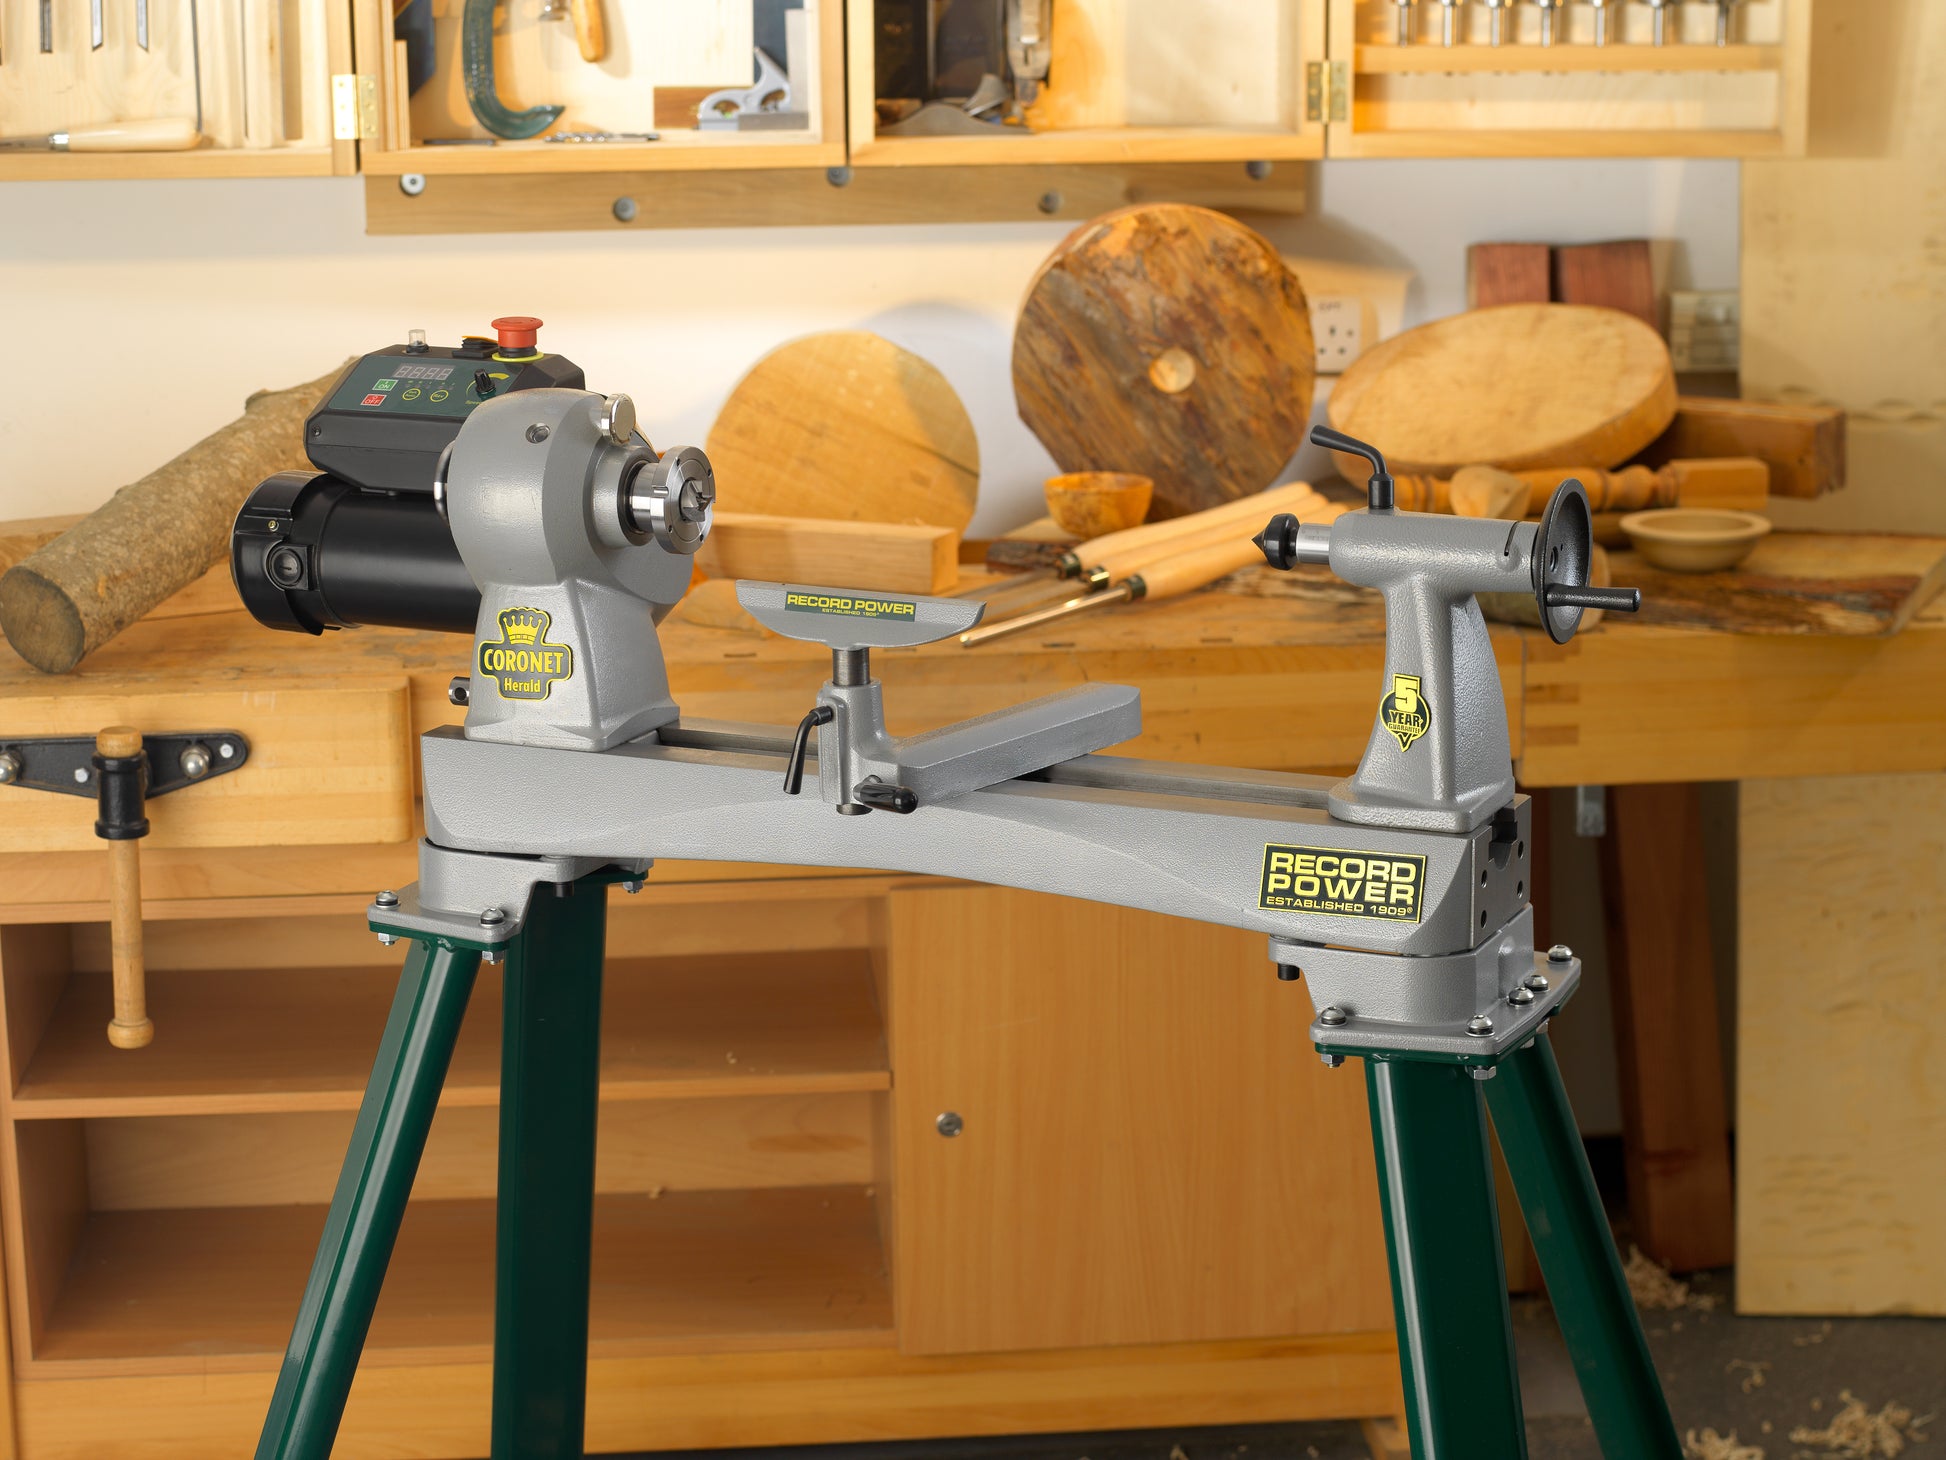 Record Power Herald Lathe in Woodshop with bench feet and Legs